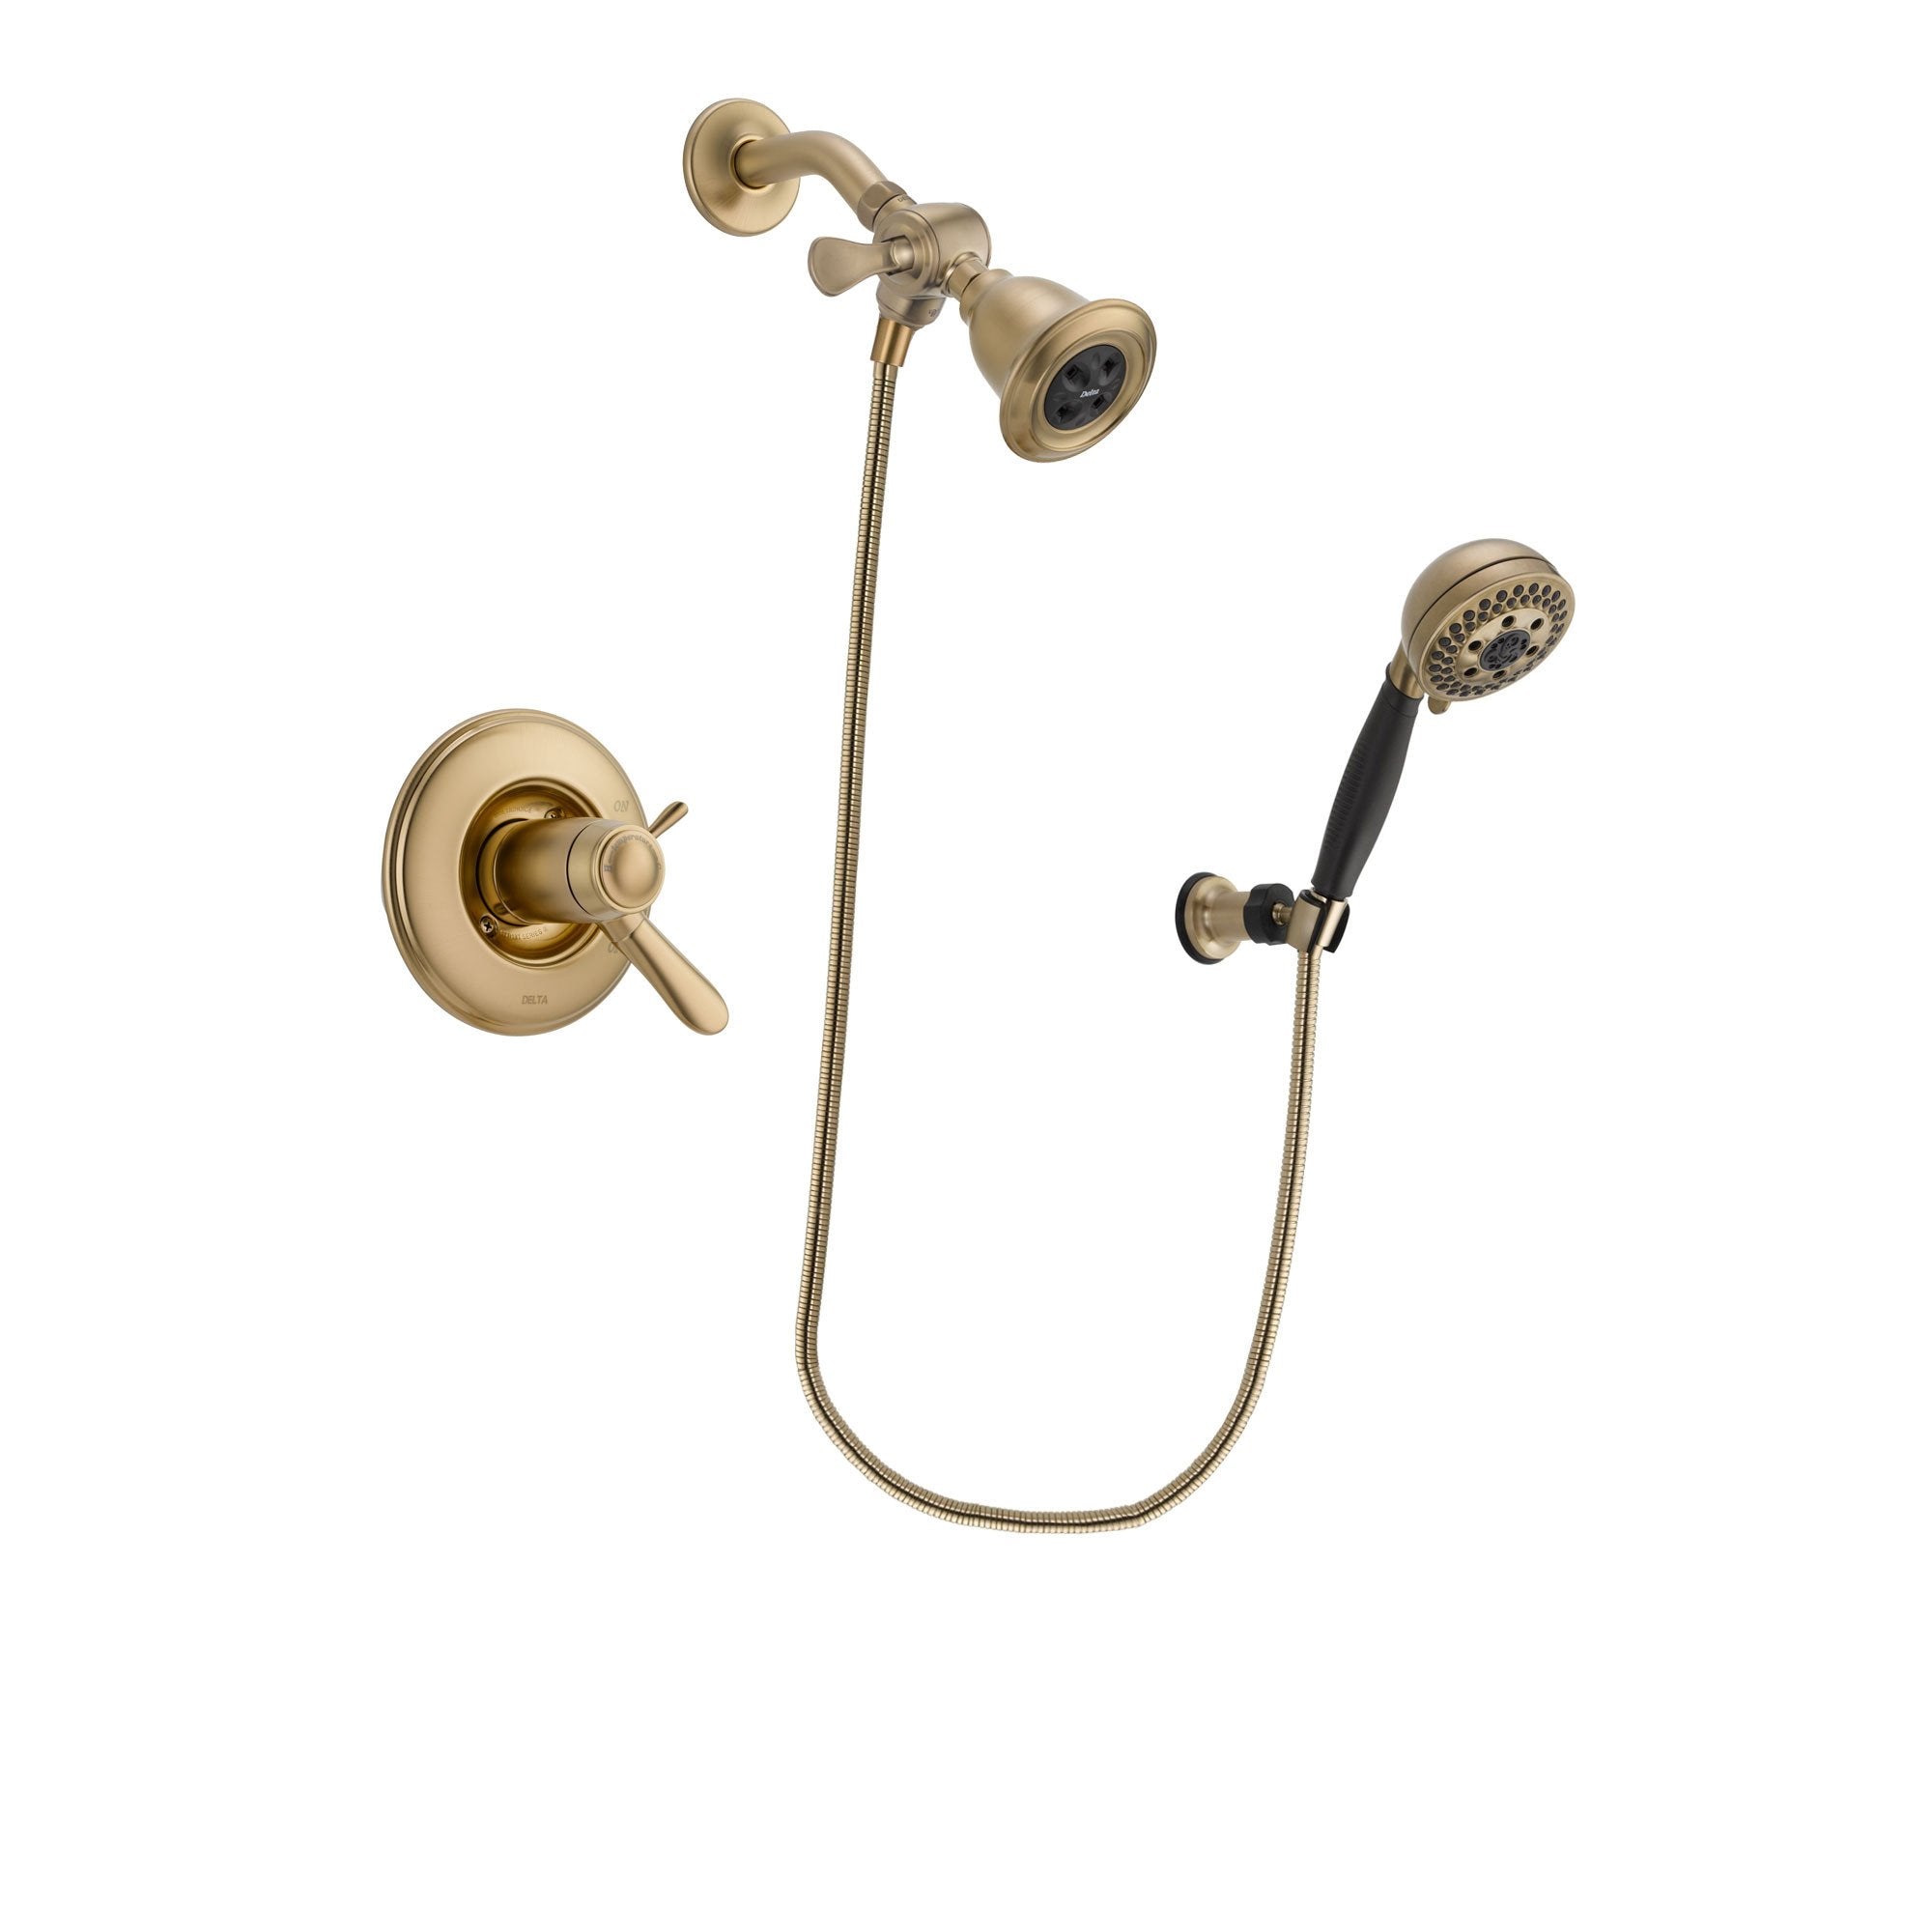 Delta Lahara Champagne Bronze Finish Thermostatic Shower Faucet System Package with Water Efficient Showerhead and 5-Spray Wall Mount Hand Shower Includes Rough-in Valve DSP3760V